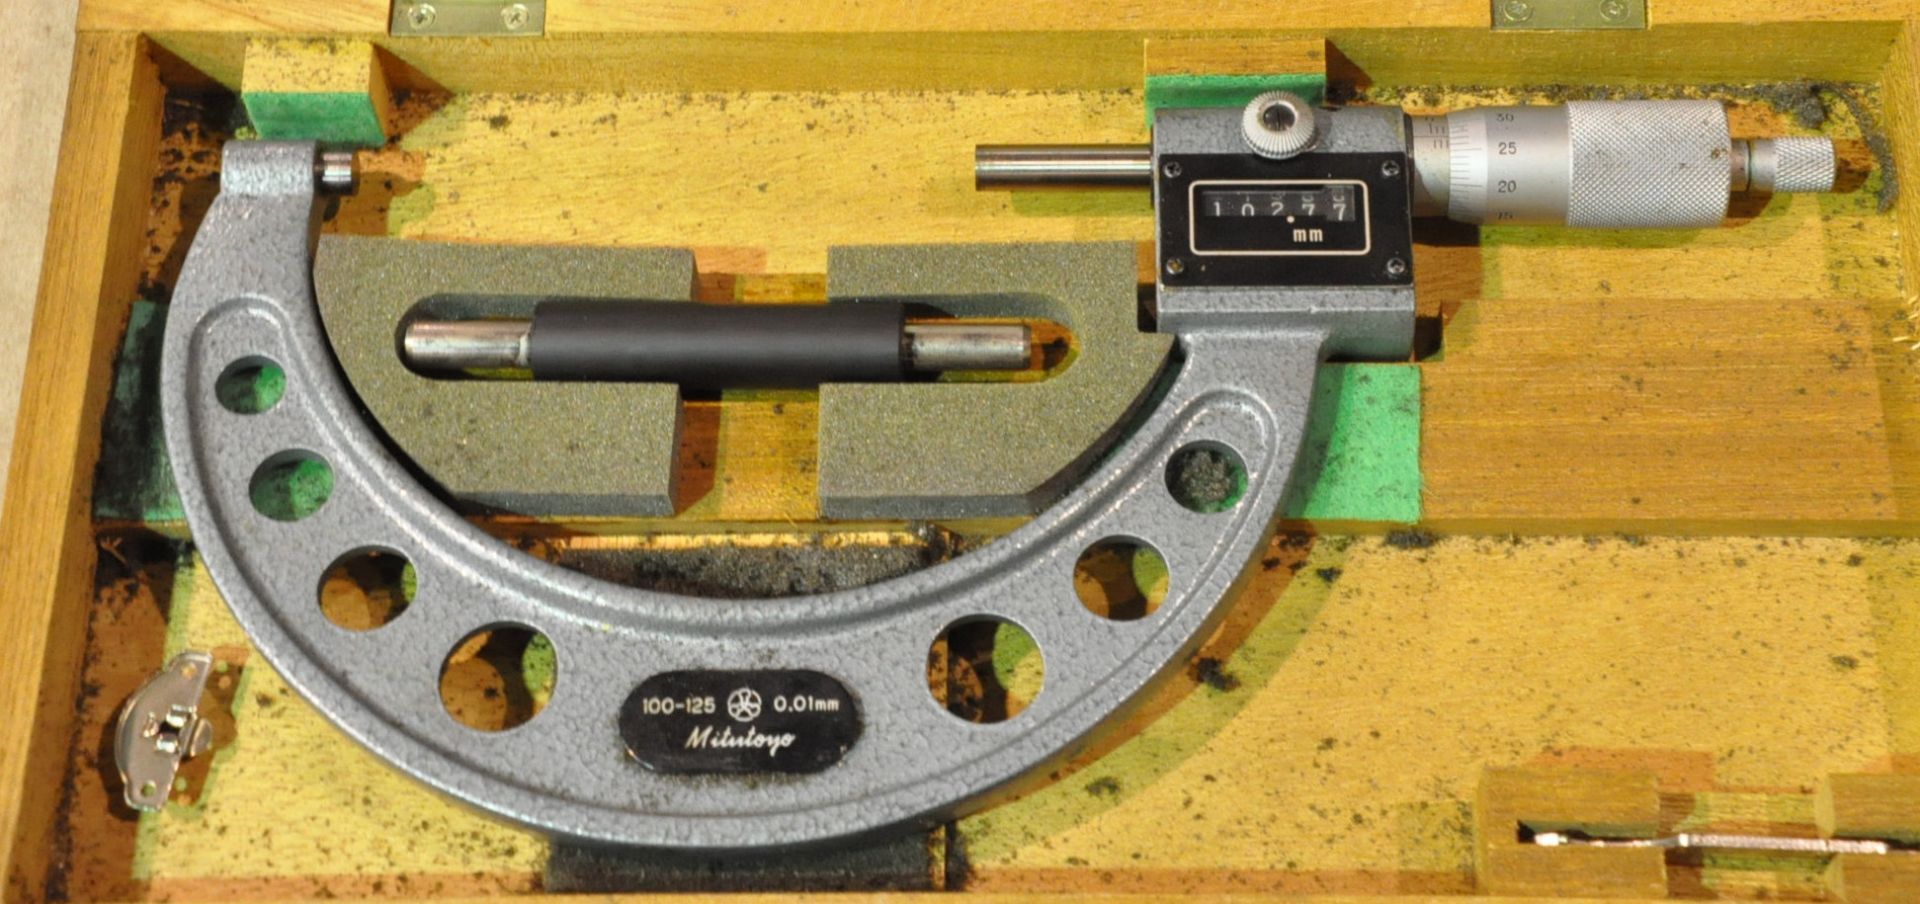 Mitutoyo 100 - 125mm Outside Micrometer with Case